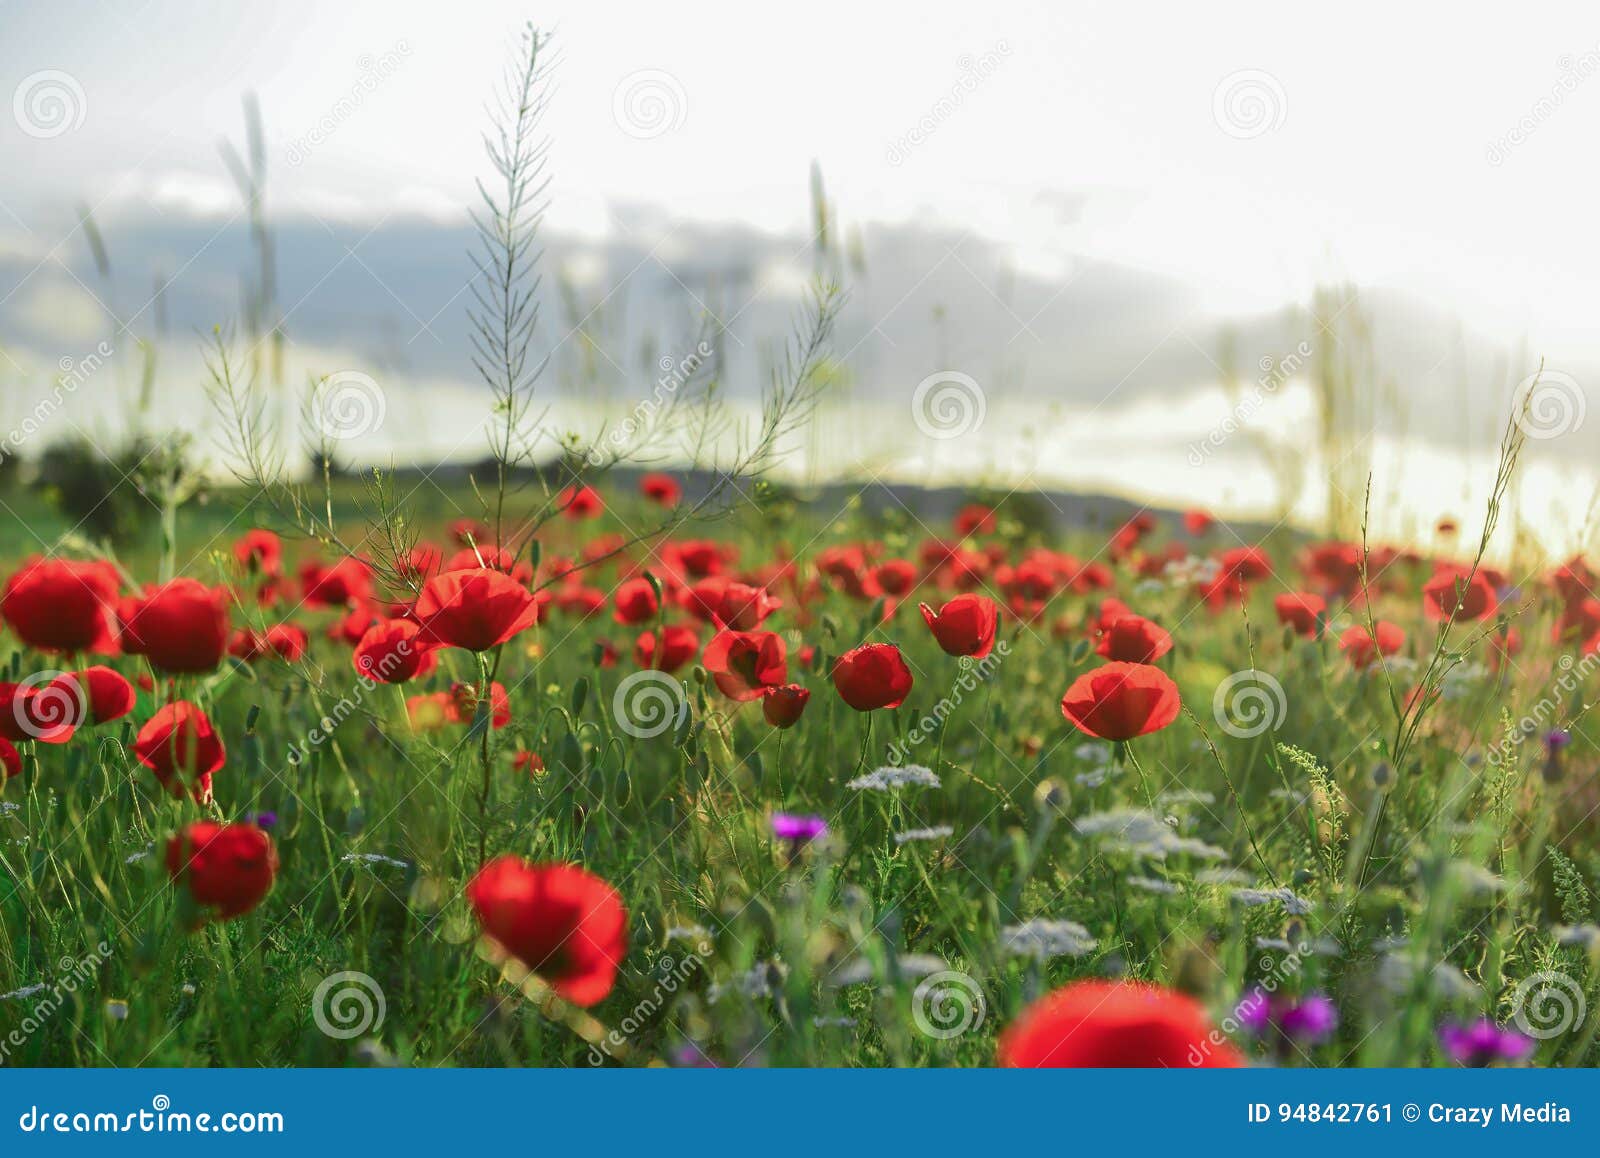 poppy flowers and peaceful nature